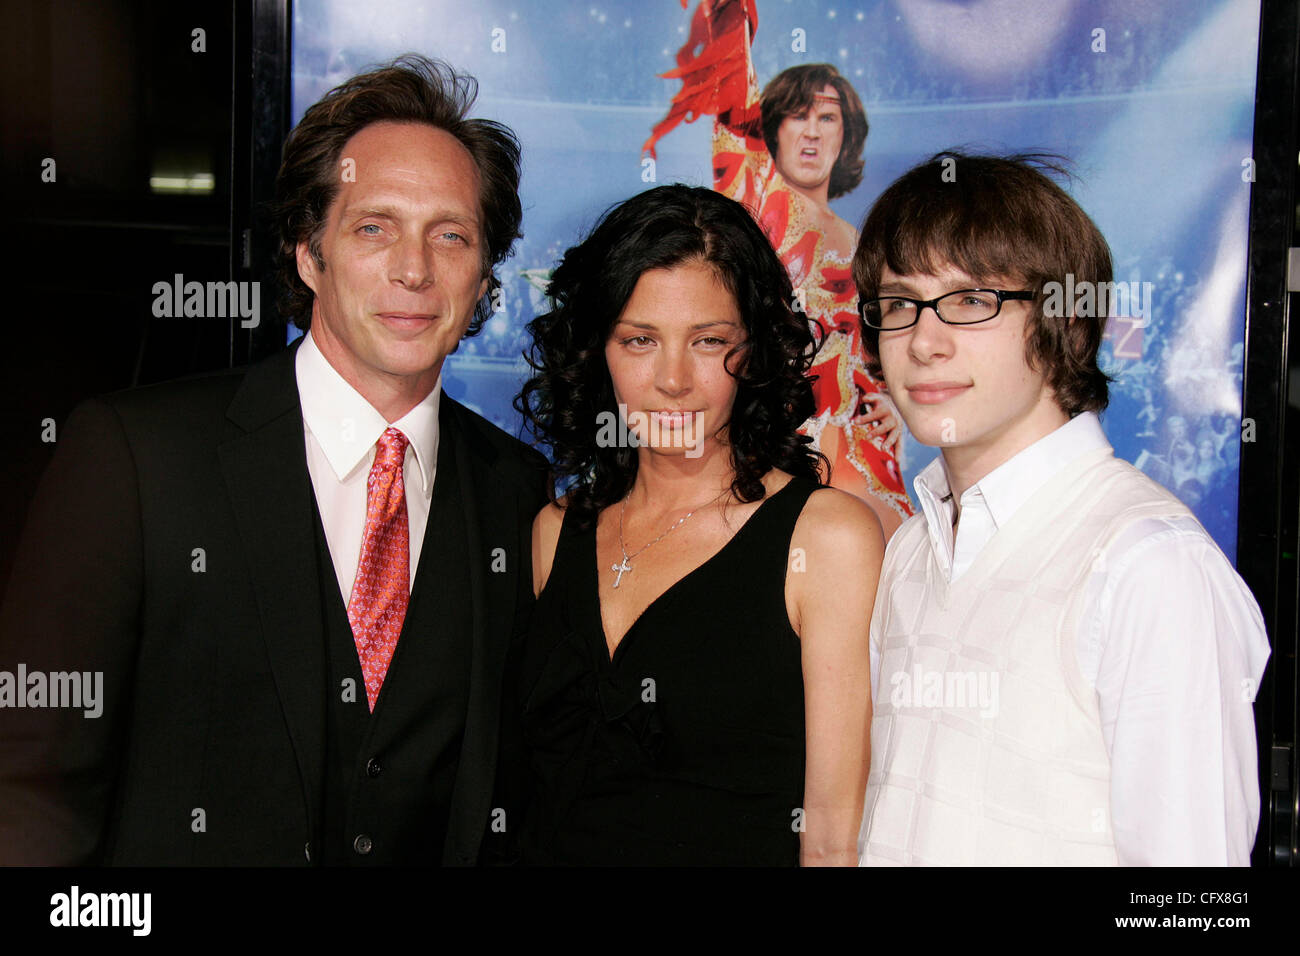 Mar 28, 2007; Hollywood, California, USA; Actor WILLIAM FICHTNER, WIFE KYM & SON SAM at the 'Blades Of Glory' Los Angeles Premiere held at the Chinese Theatre. Mandatory Credit: Photo by Lisa O'Connor/ZUMA Press. (©) Copyright 2007 by Lisa O'Connor Stock Photo